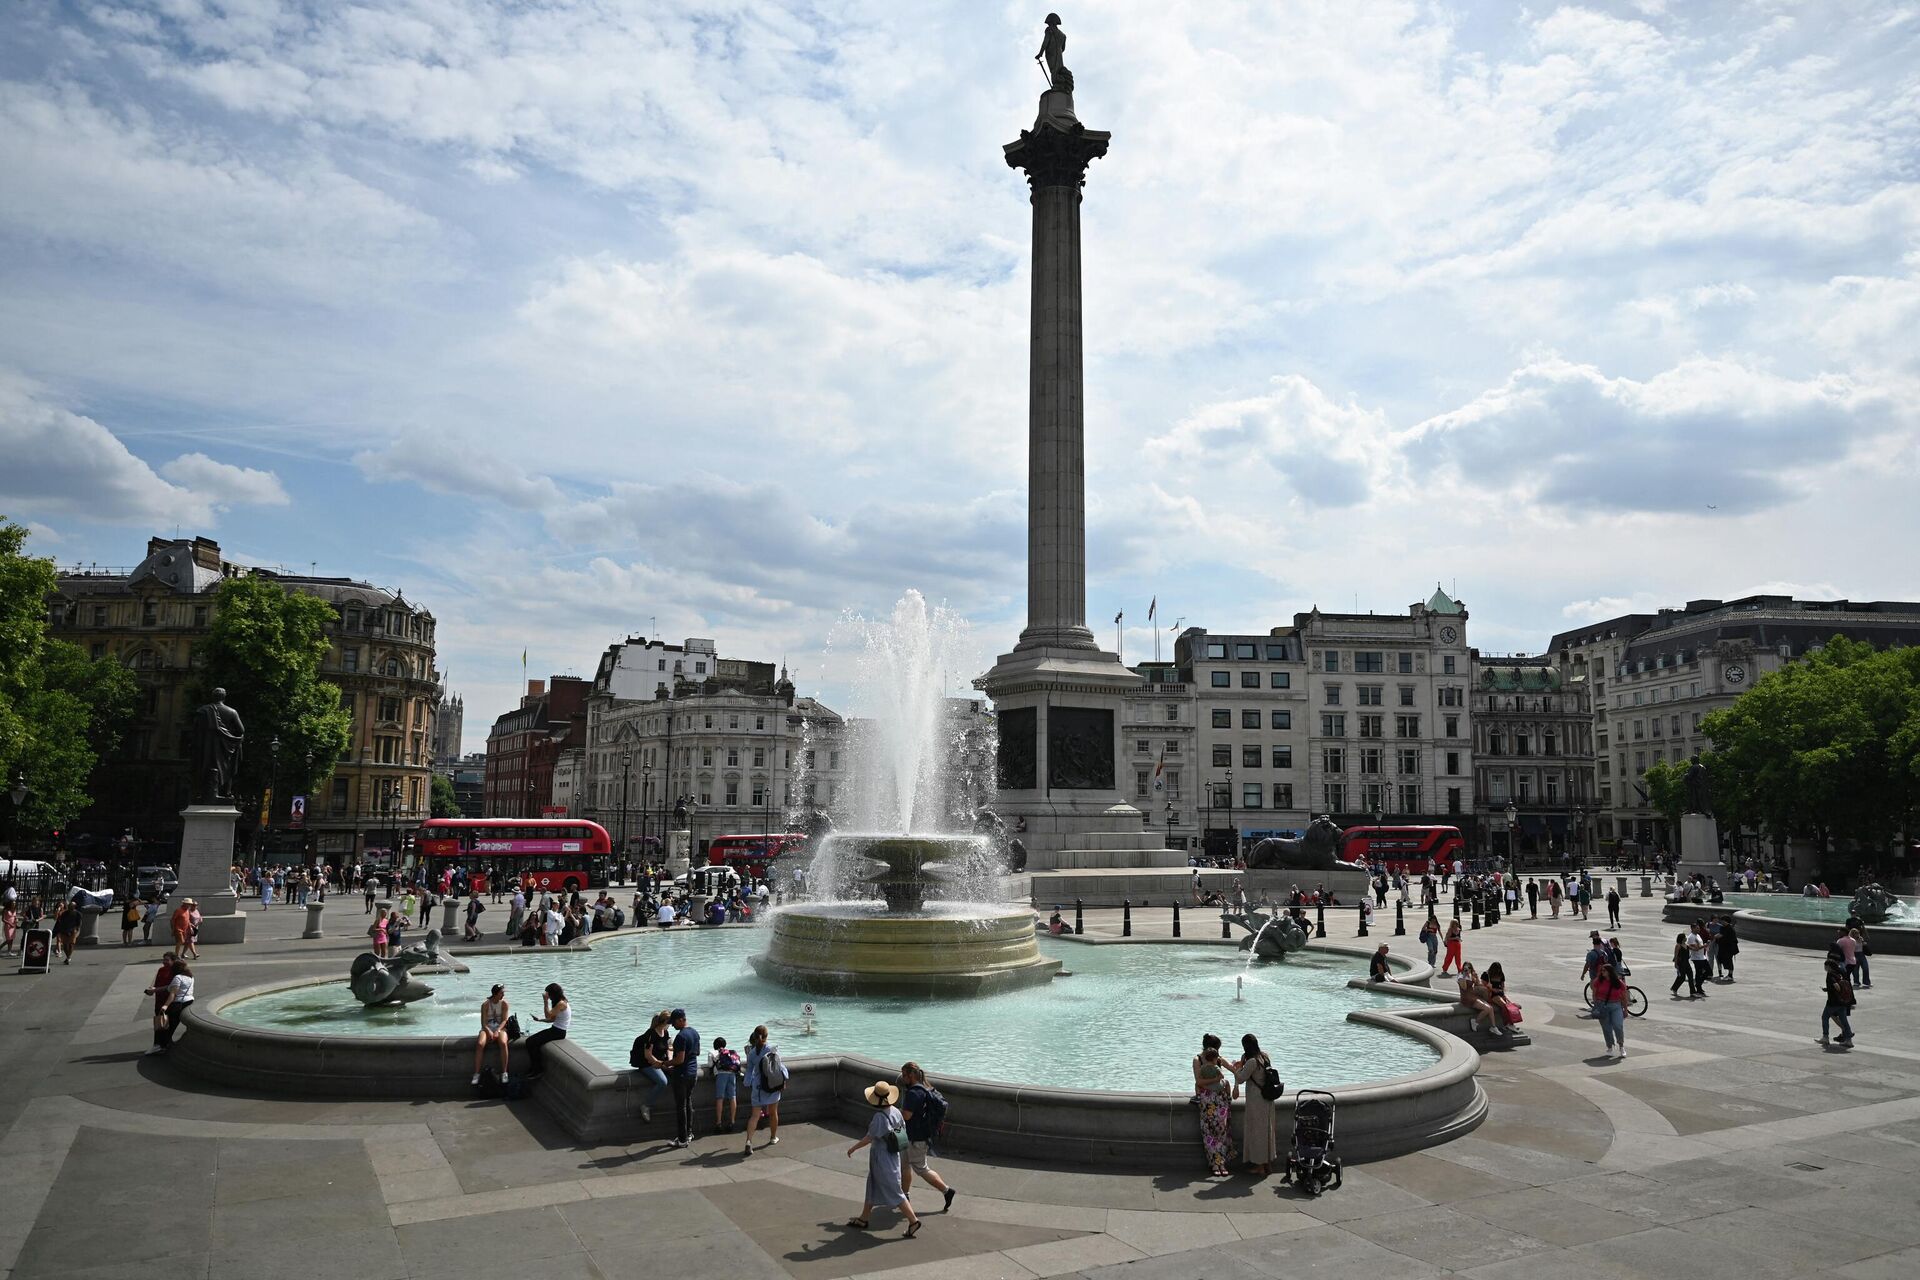 Pedestrians cool off with their feet in the water of the Trafalgar Square fountain, in central London, on July 13, 2022, during a heatwave. - Britain issued, on July 13, 2022 an extreme heat warning, with temperatures predicted to hit more than 30 degrees Celsius (86 Fahrenheit) across large parts of England and Wales - Sputnik International, 1920, 18.07.2022